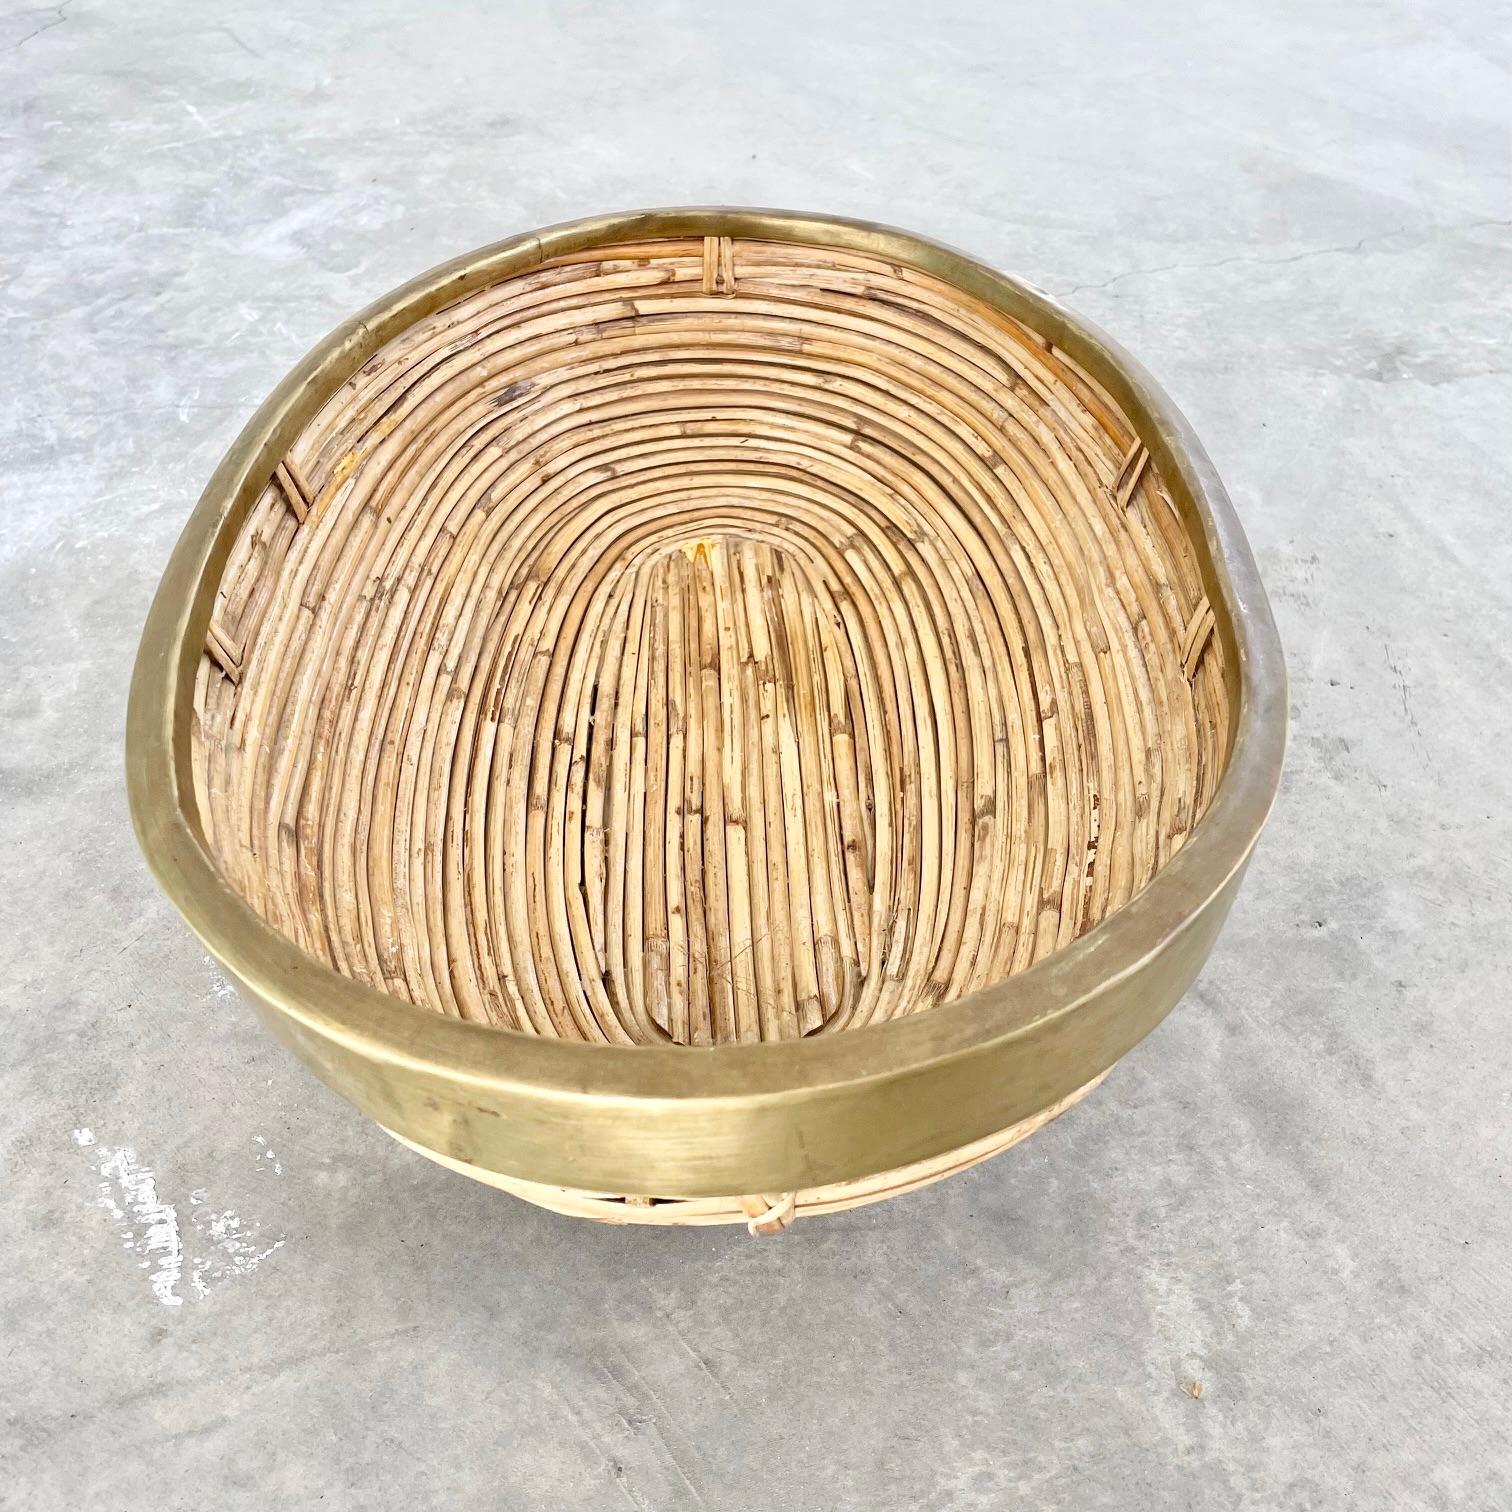 Crespi Style Bamboo and Brass Bowl 2